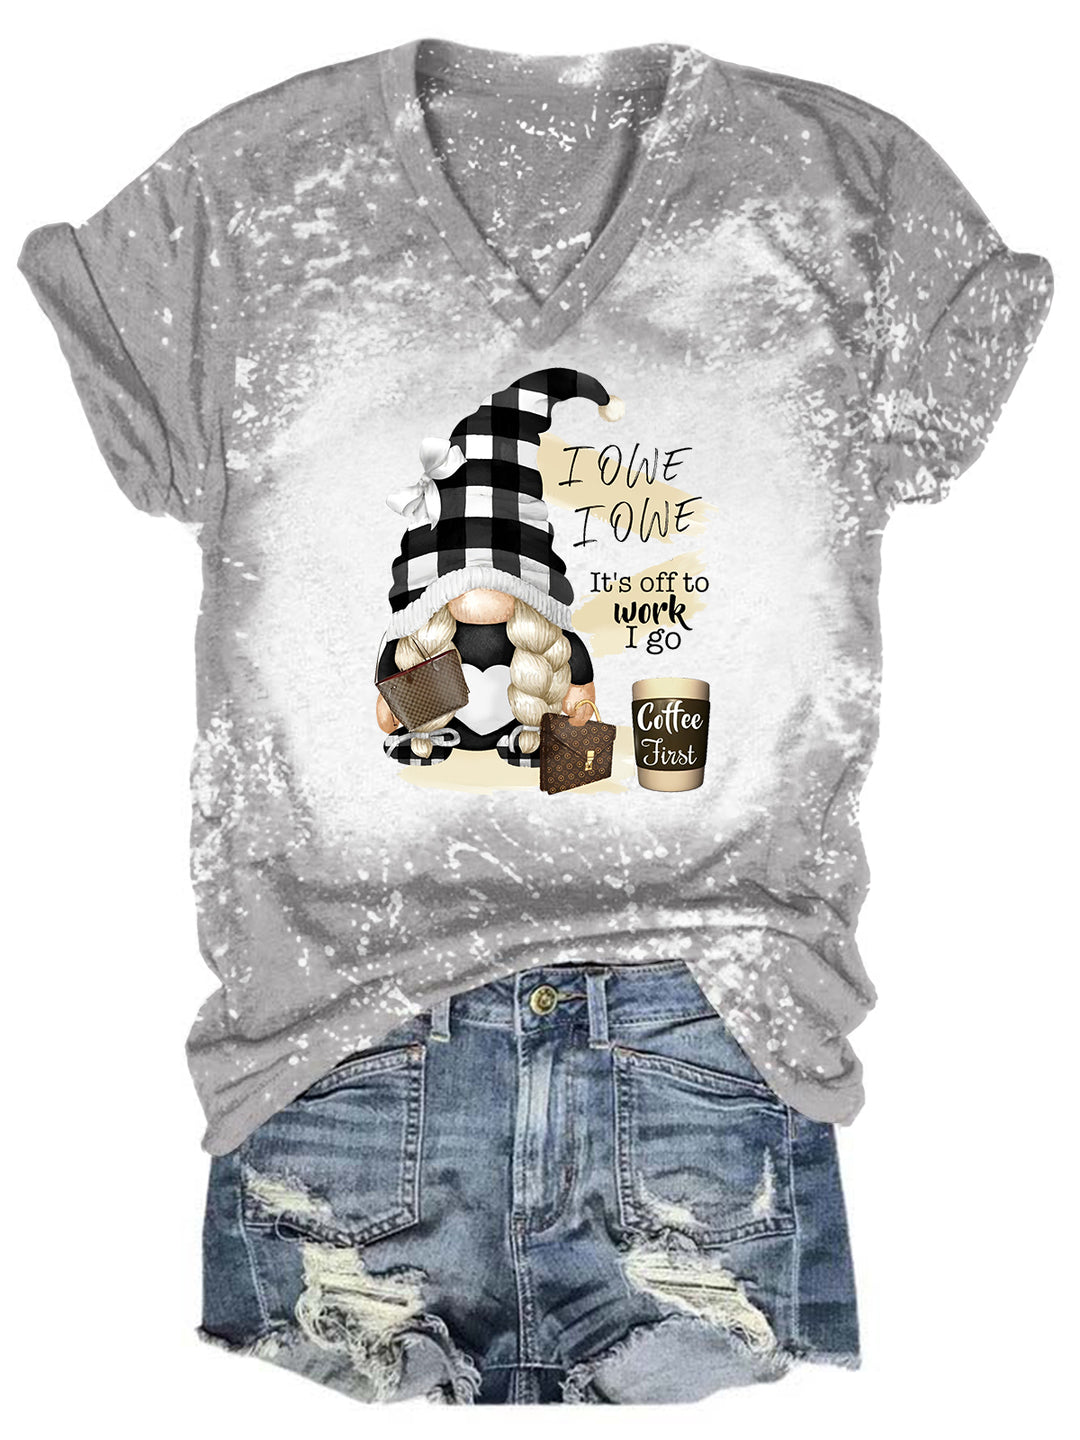 I Owe It's Off To Work  Coffee Gnome Tie Dye V Neck T-shirt